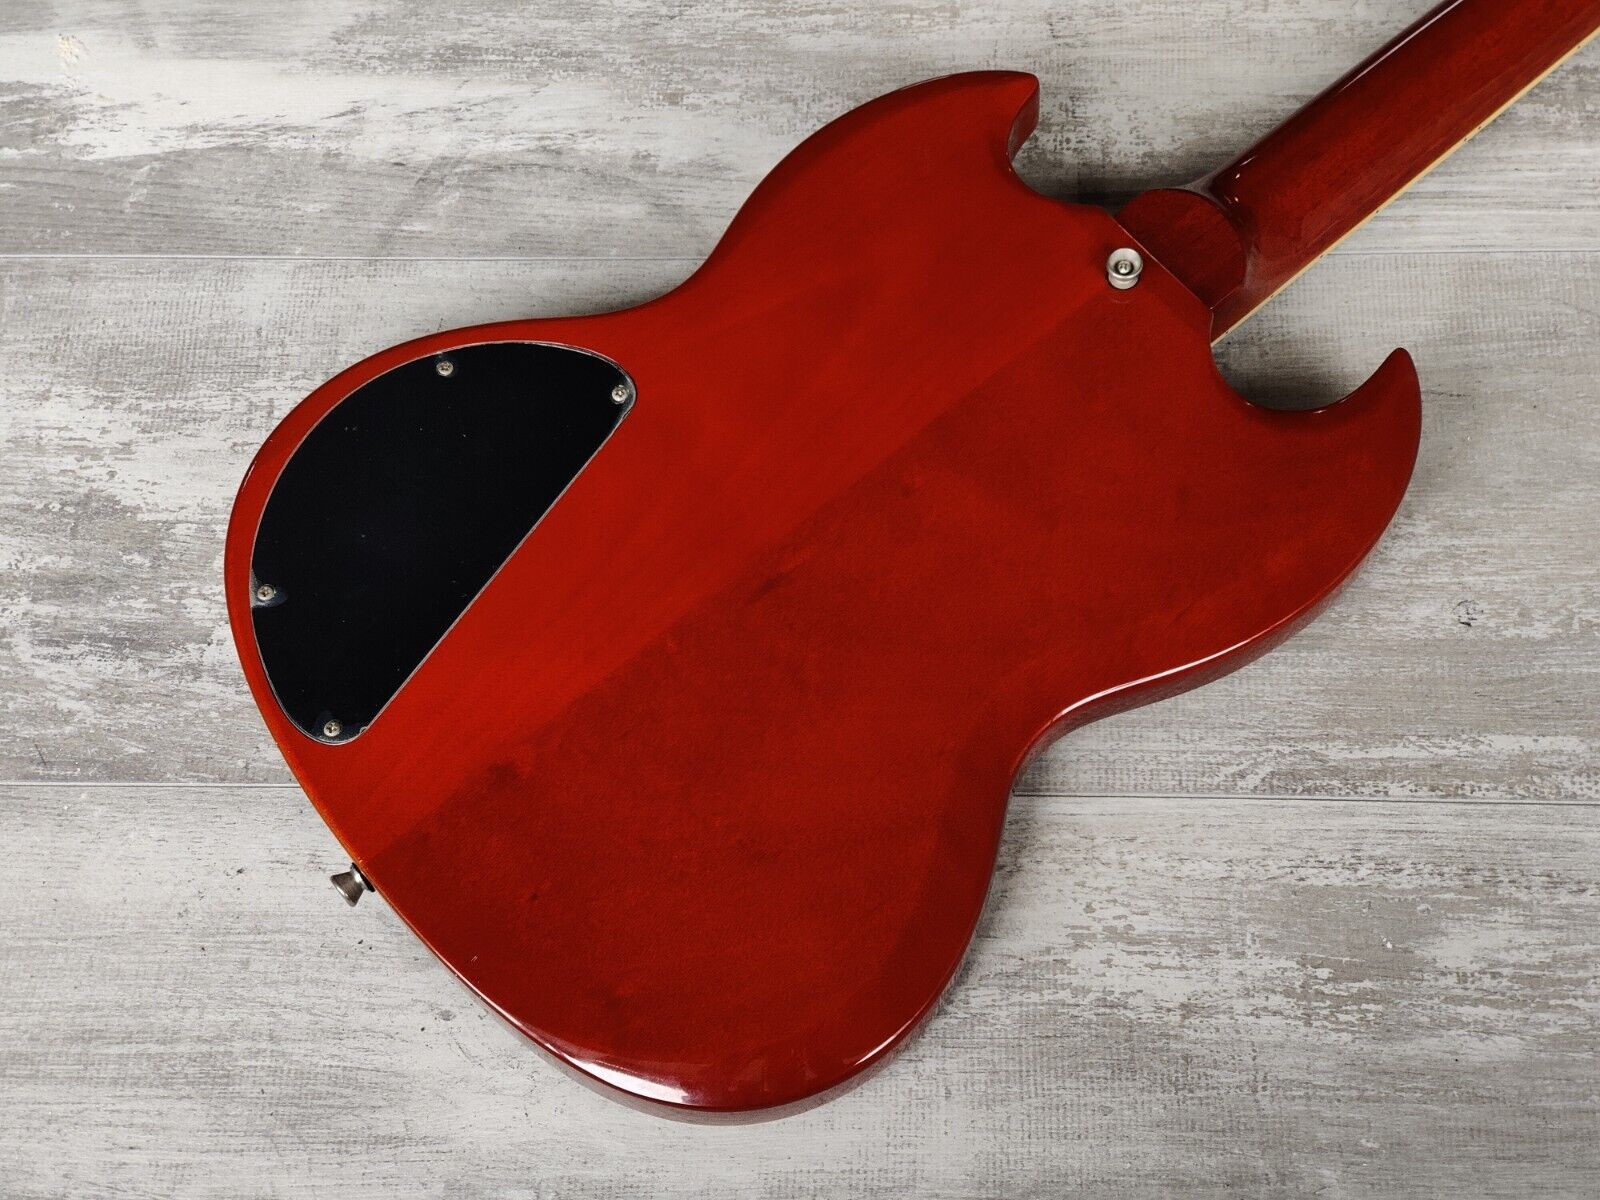 Blitz by Aria Pro II SG Double Cutaway (Cherry Red)